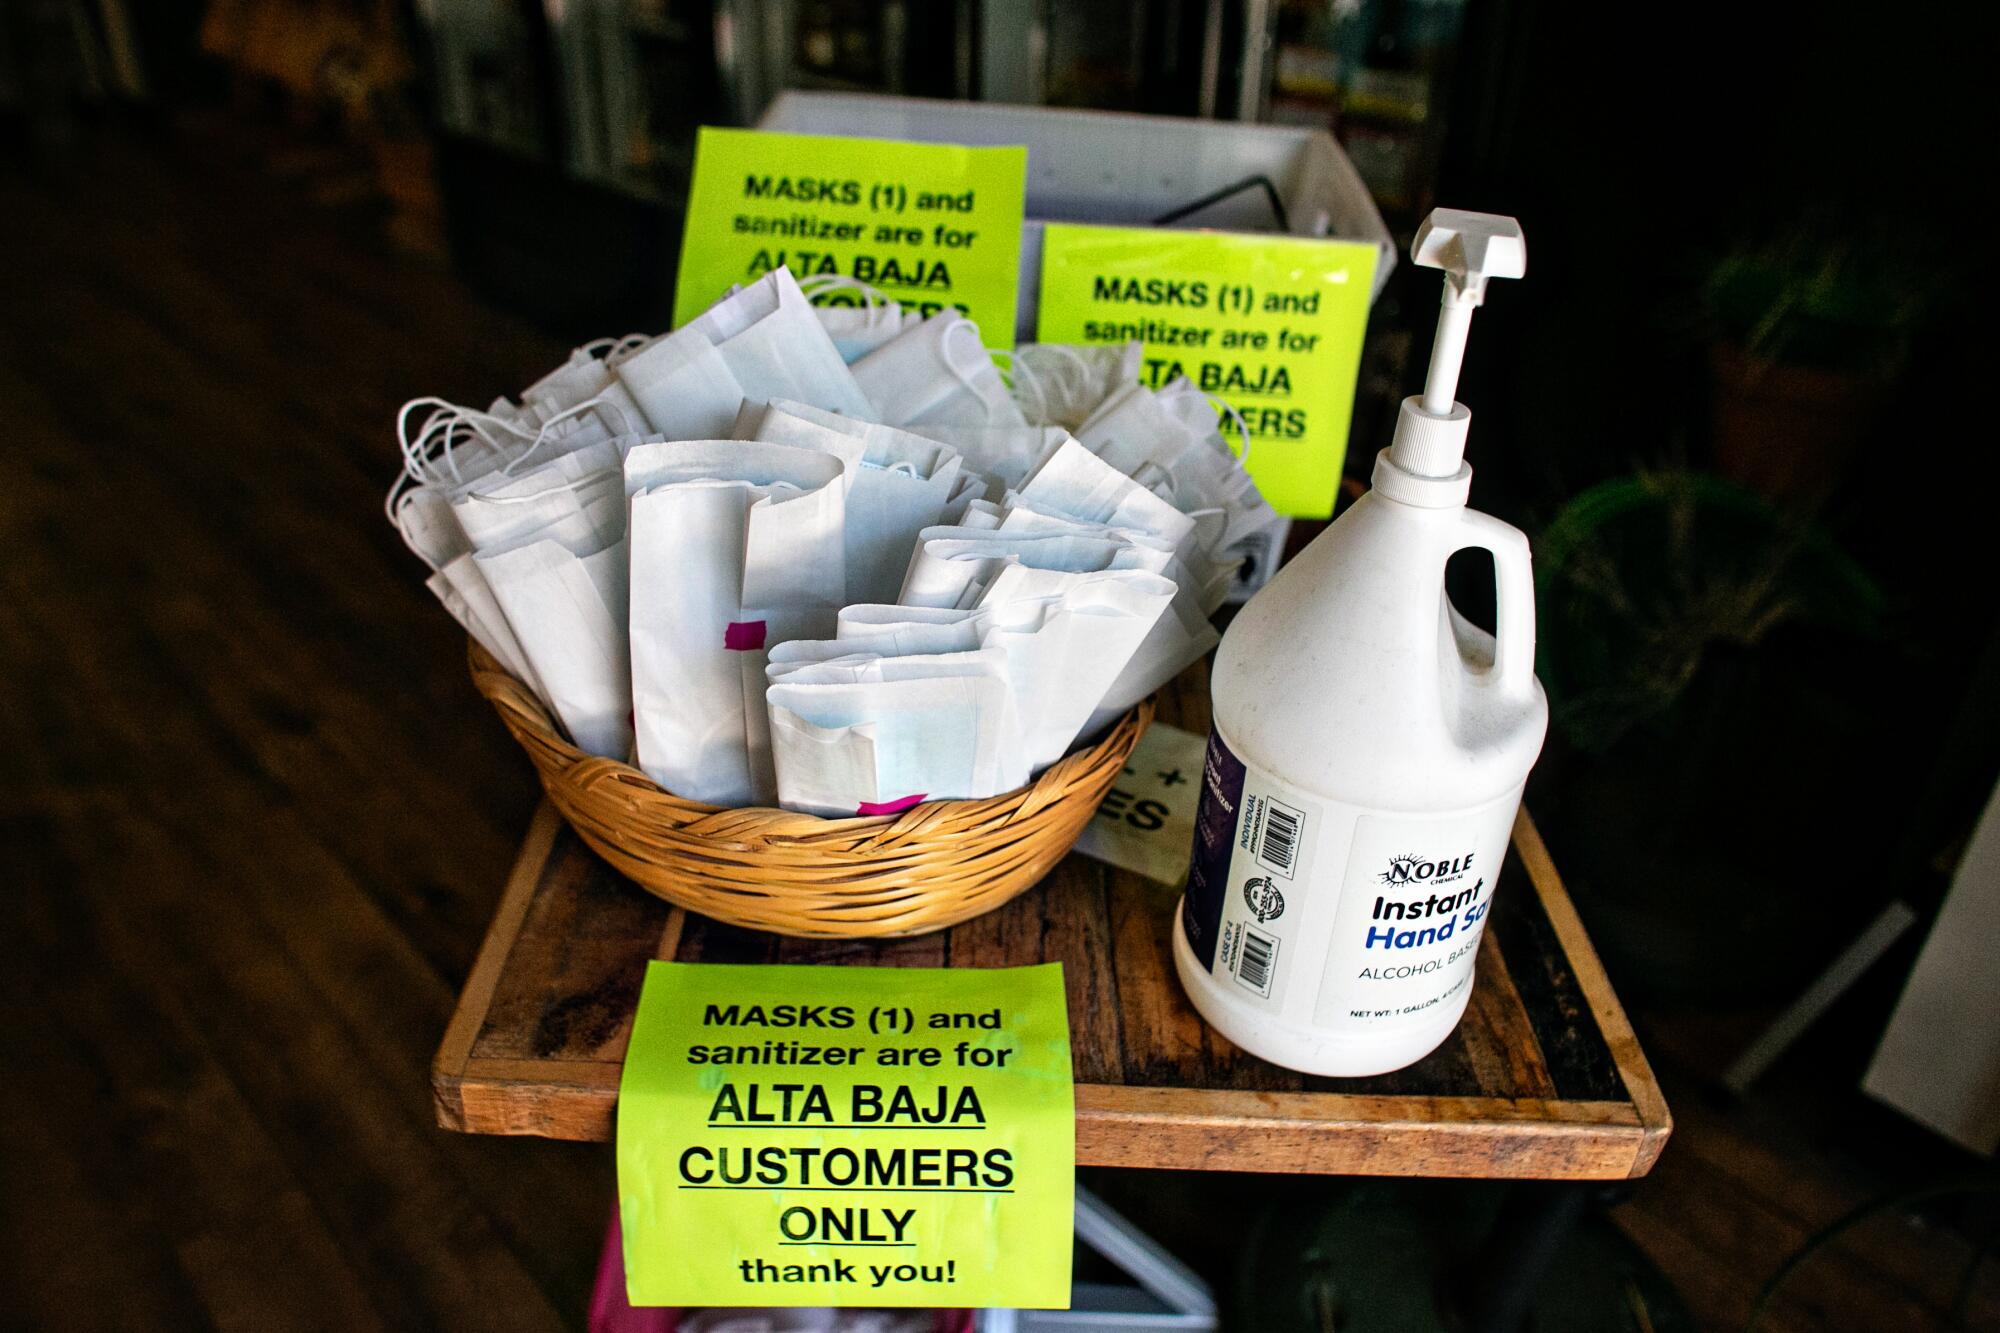 Alta Baja Market provides masks and hand sanitizer to shoppers as they enter the store.